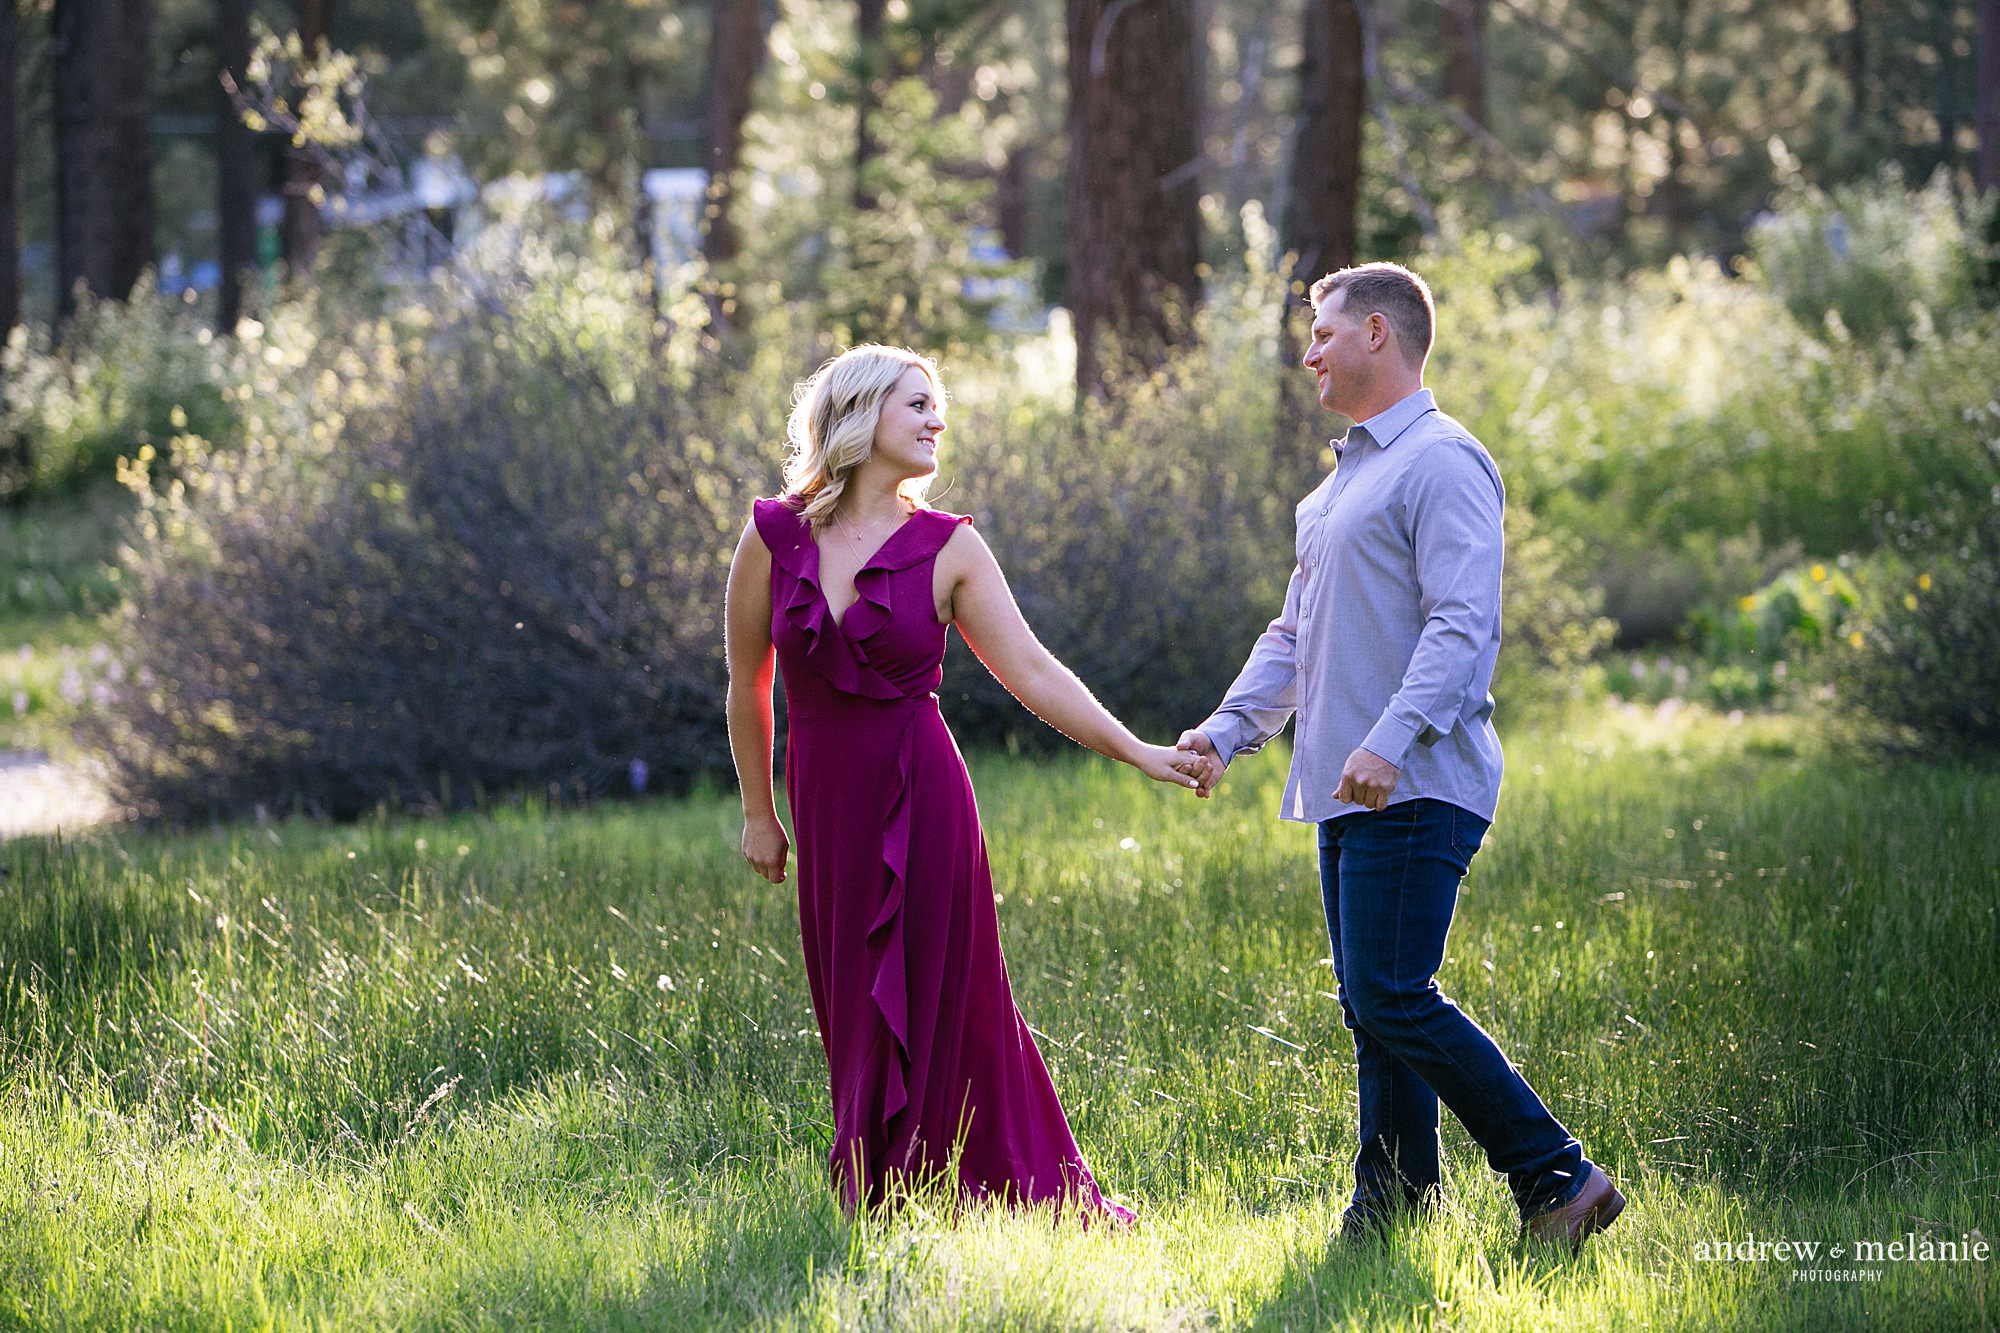 Andrew and Melanie Photography engagement session highlights